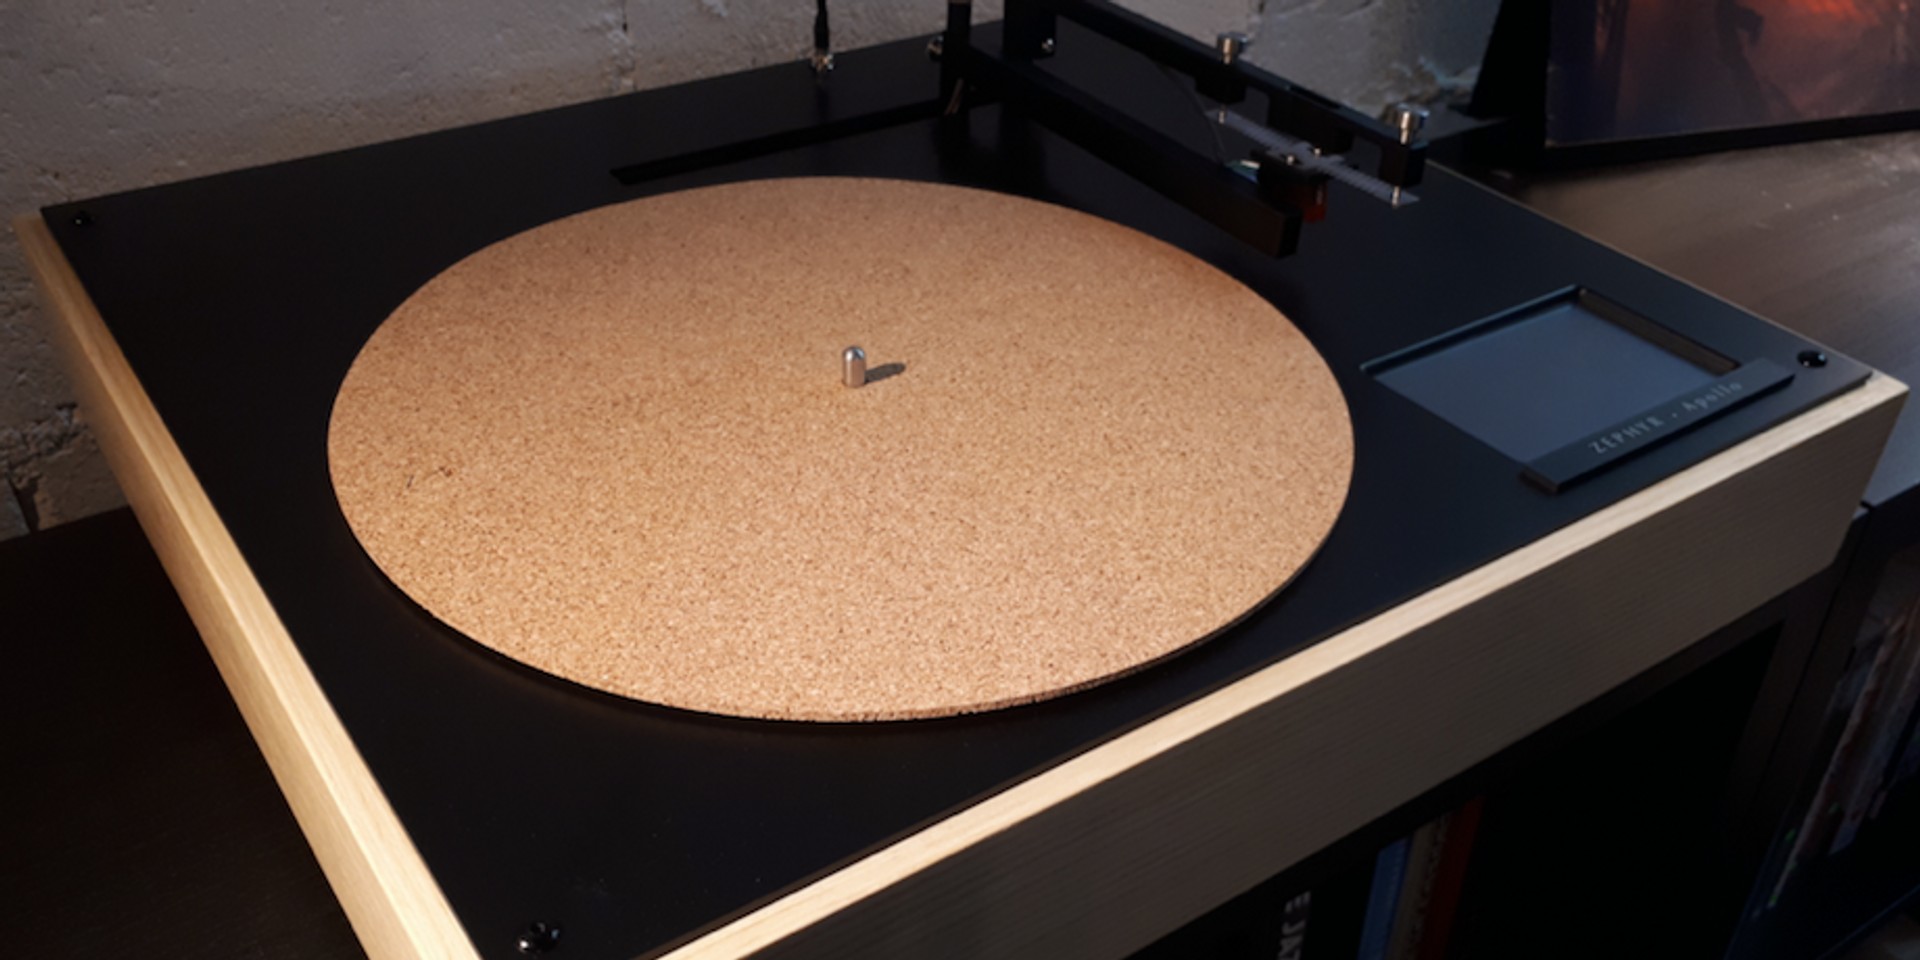 Vinylicious Music launches crowdfunding campaign to produce new turntable, the Zephyr Apollo